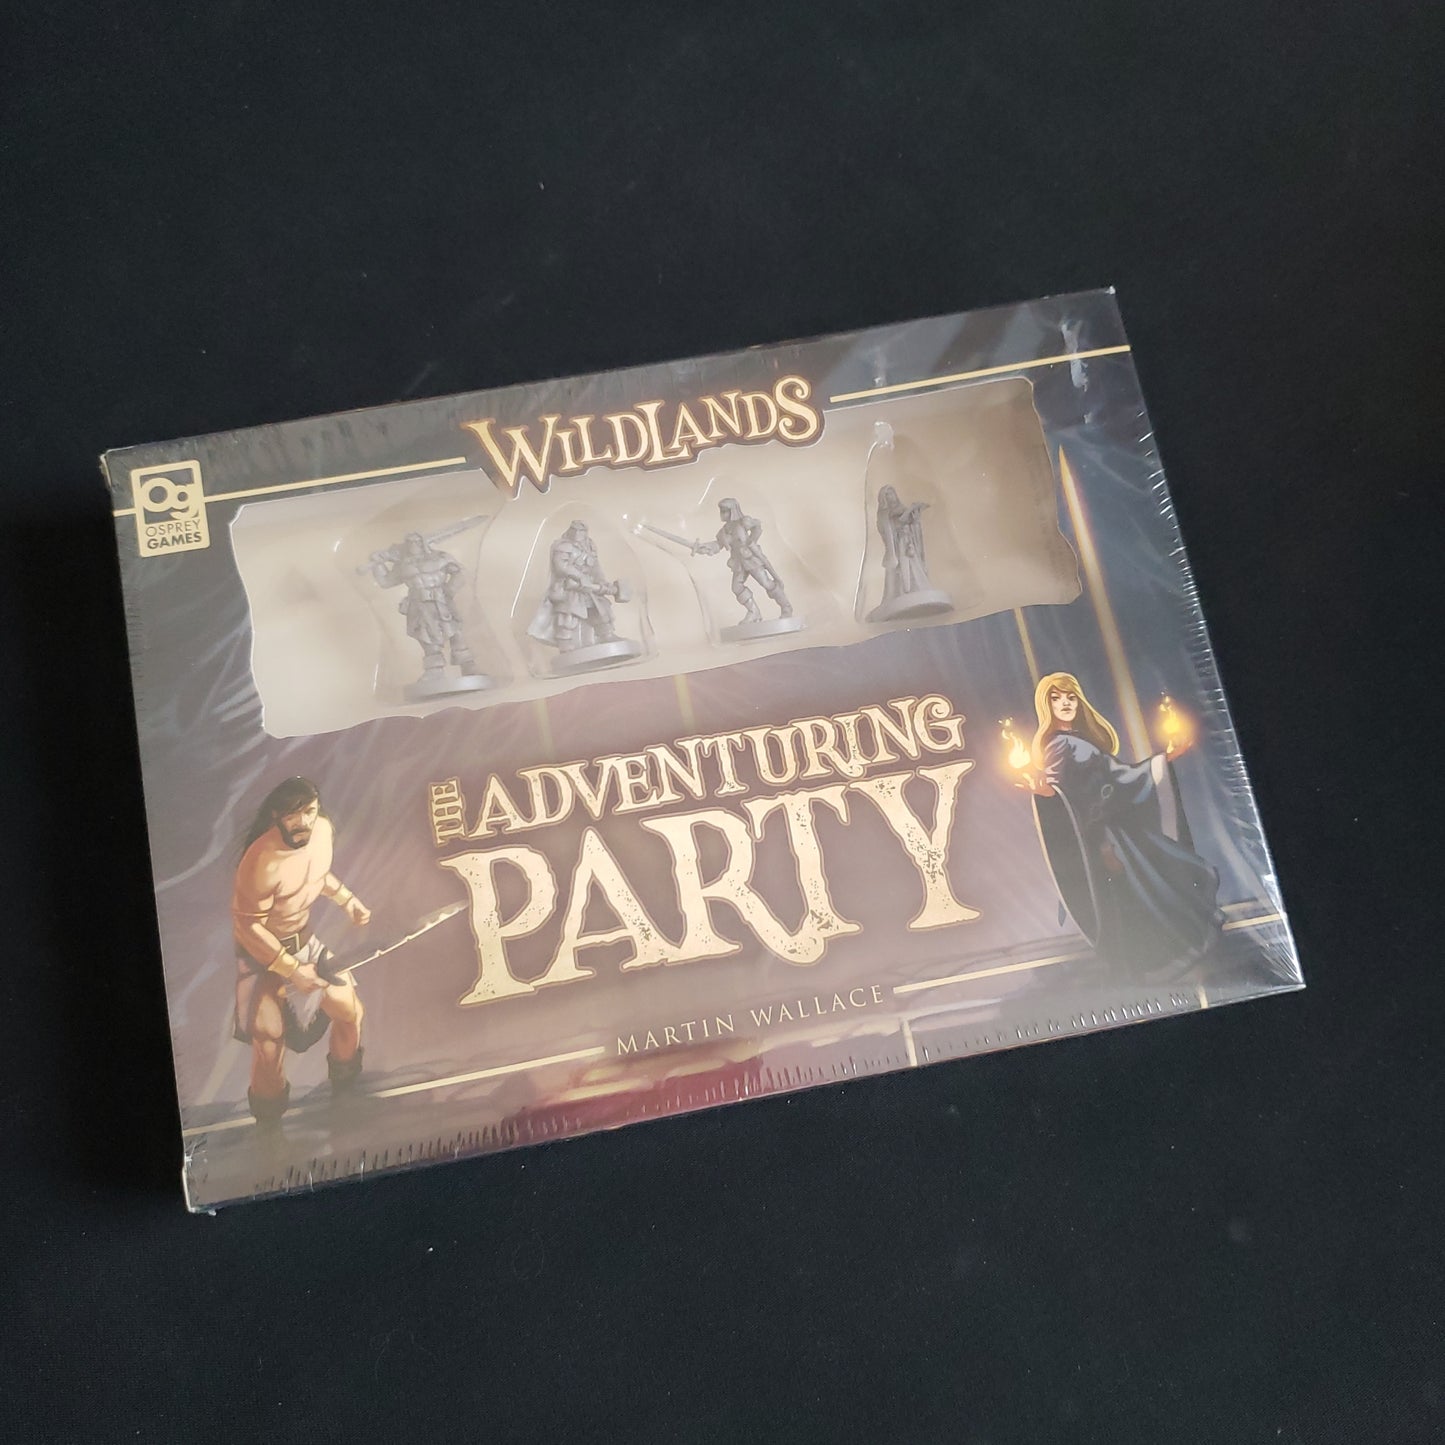 Image shows the front cover of the box of the Adventuring Party expansion for the Wildlands board game